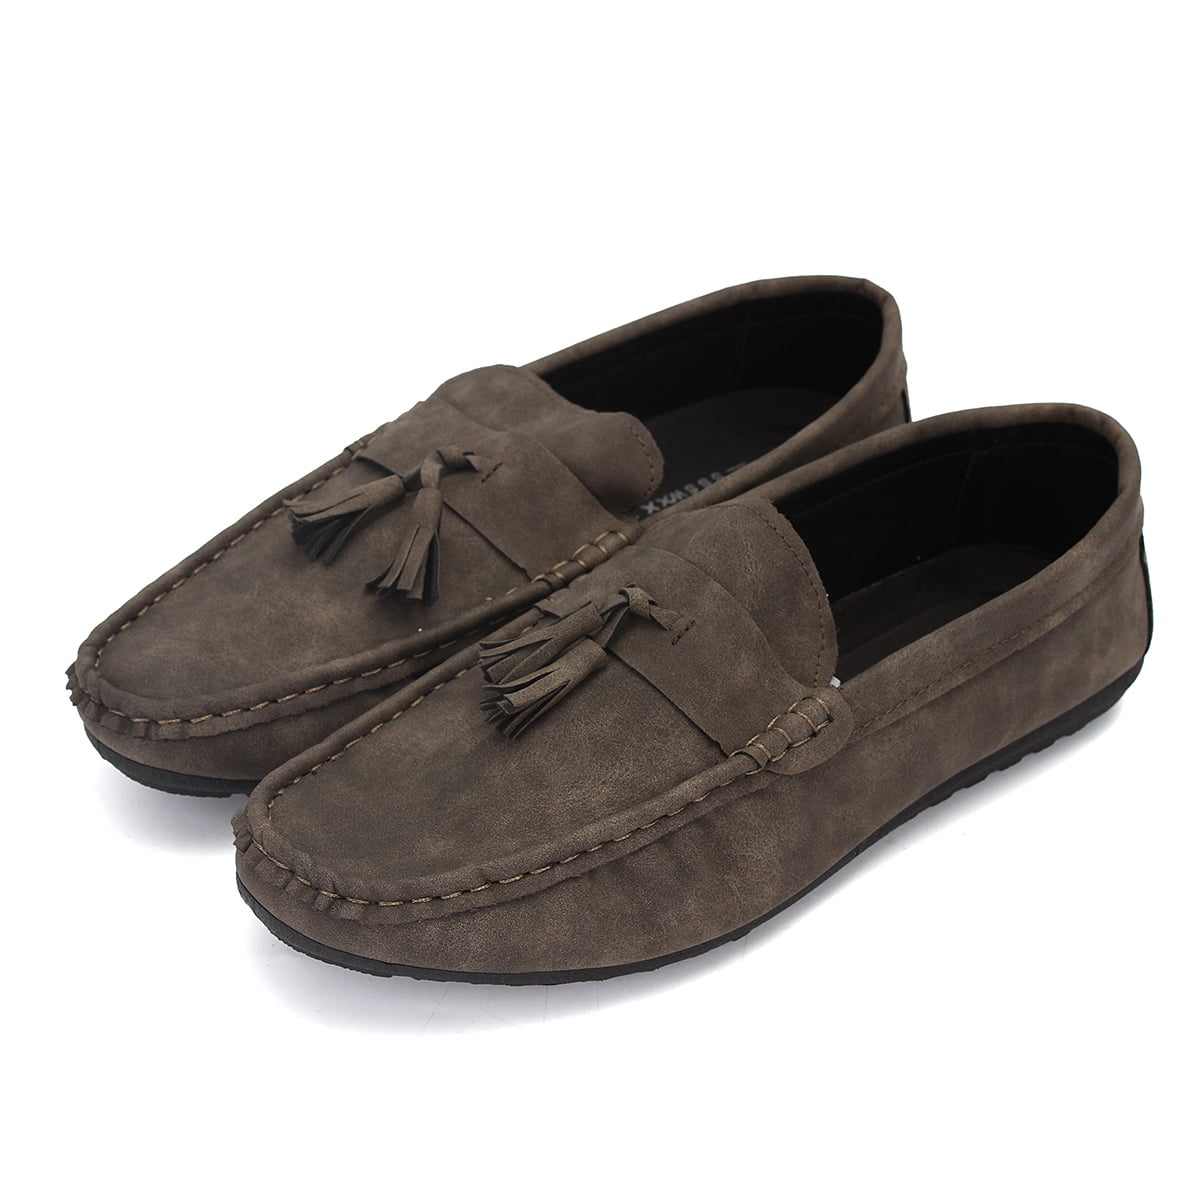 Men's Comfortable Suede Slip On Loafers Driving Casual Moccasin-Gommino Shoes 